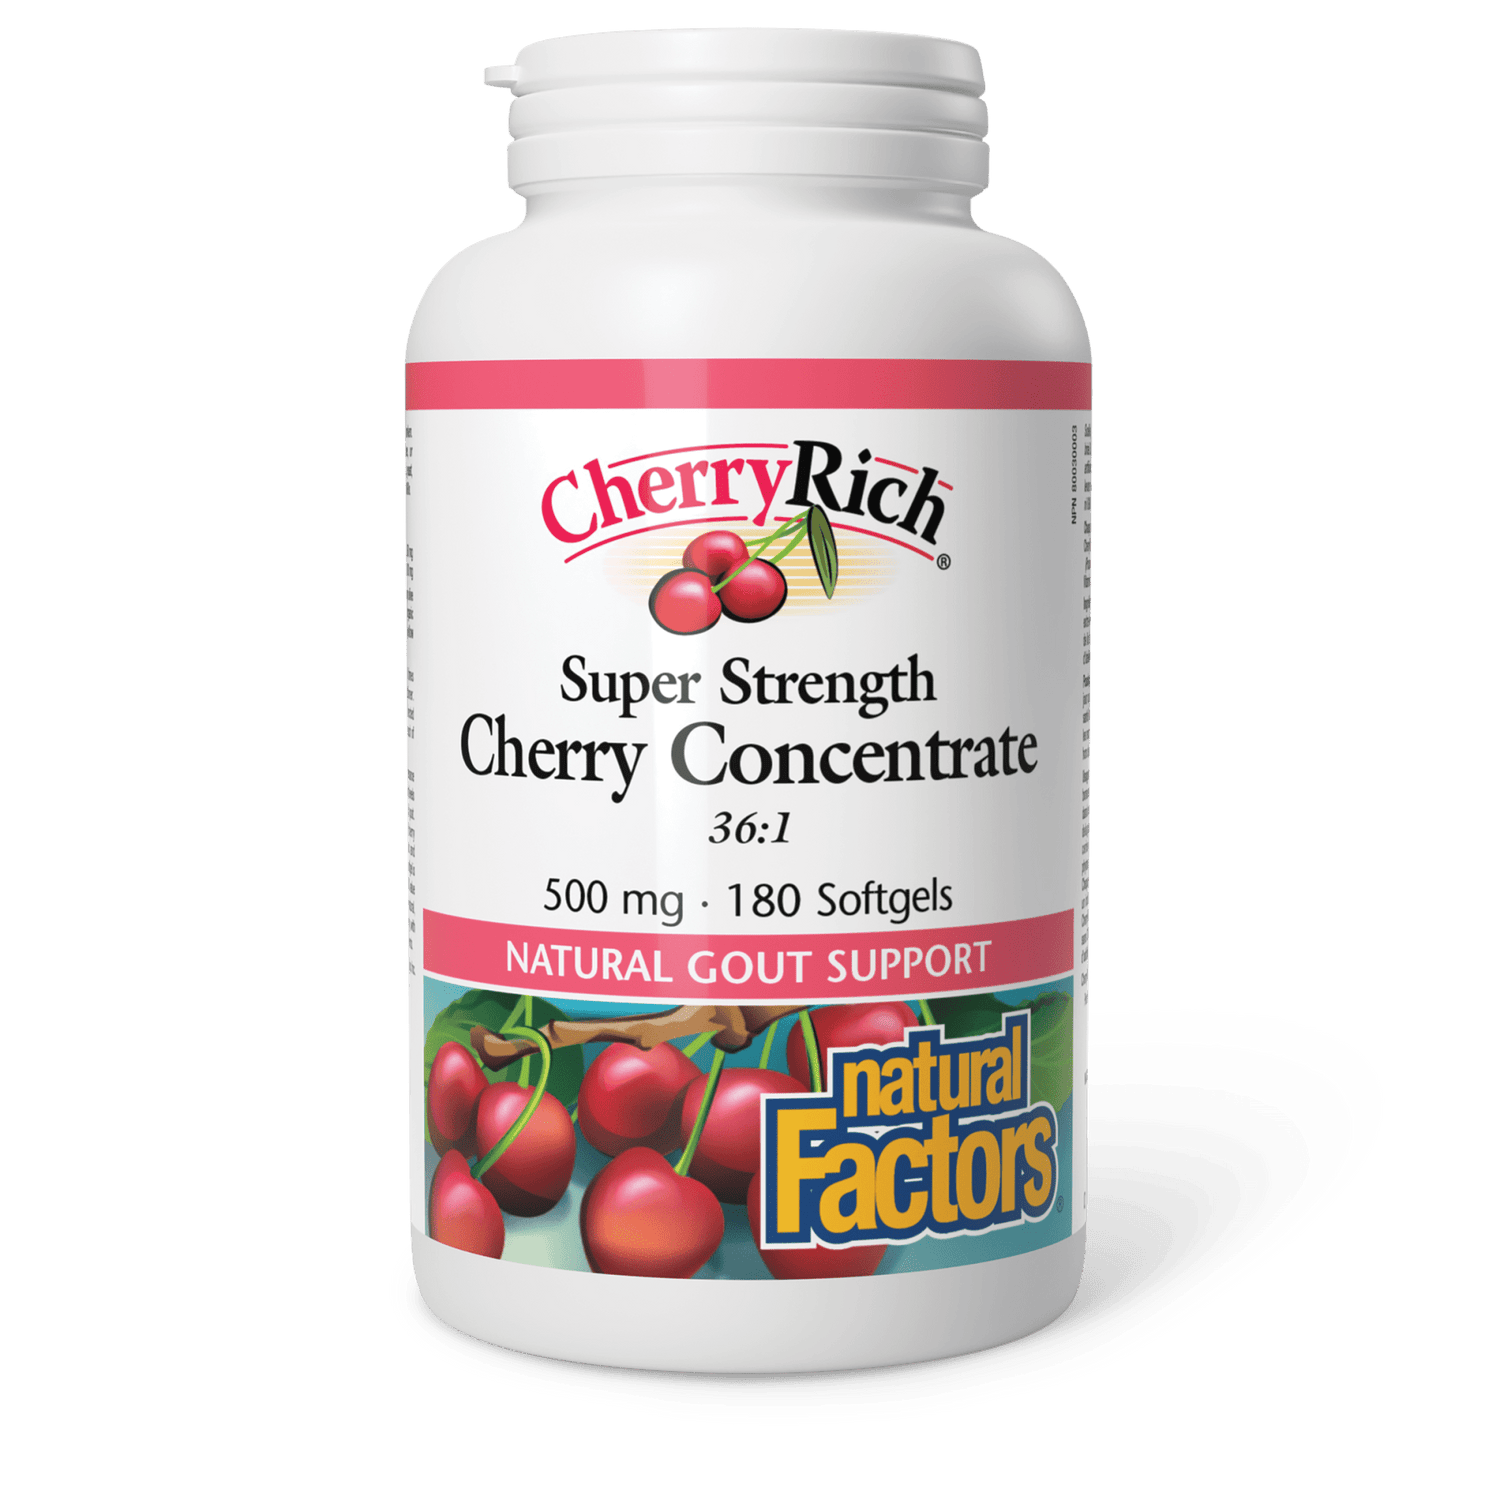 CherryRich Super Strength Cherry Concentrate 500 mg, Natural Factors|v|image|4545